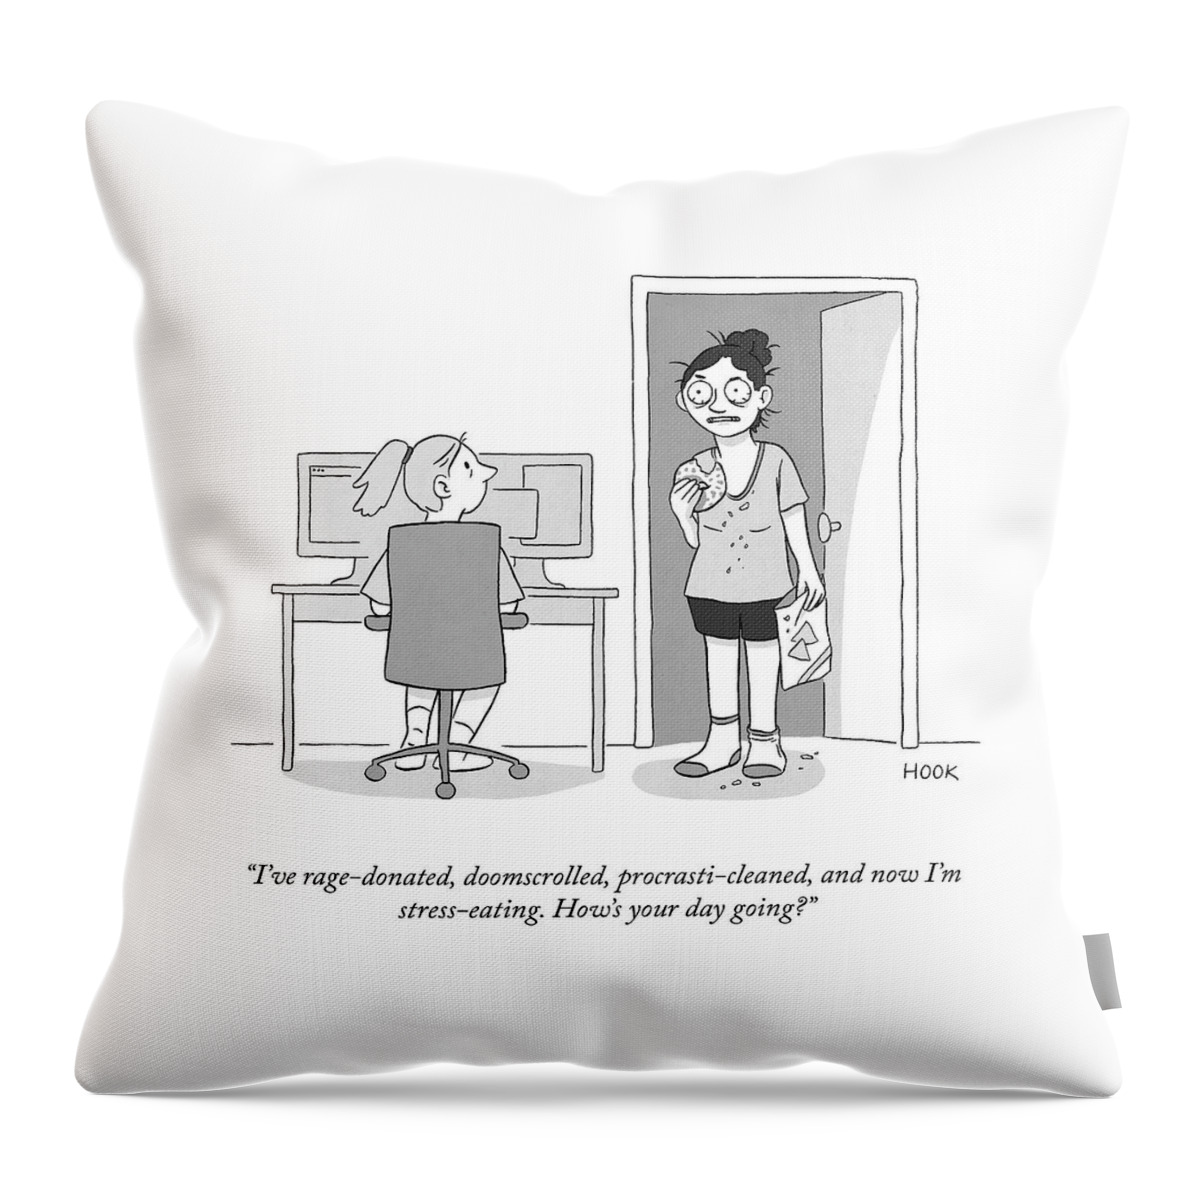 How's Your Day Going? Throw Pillow